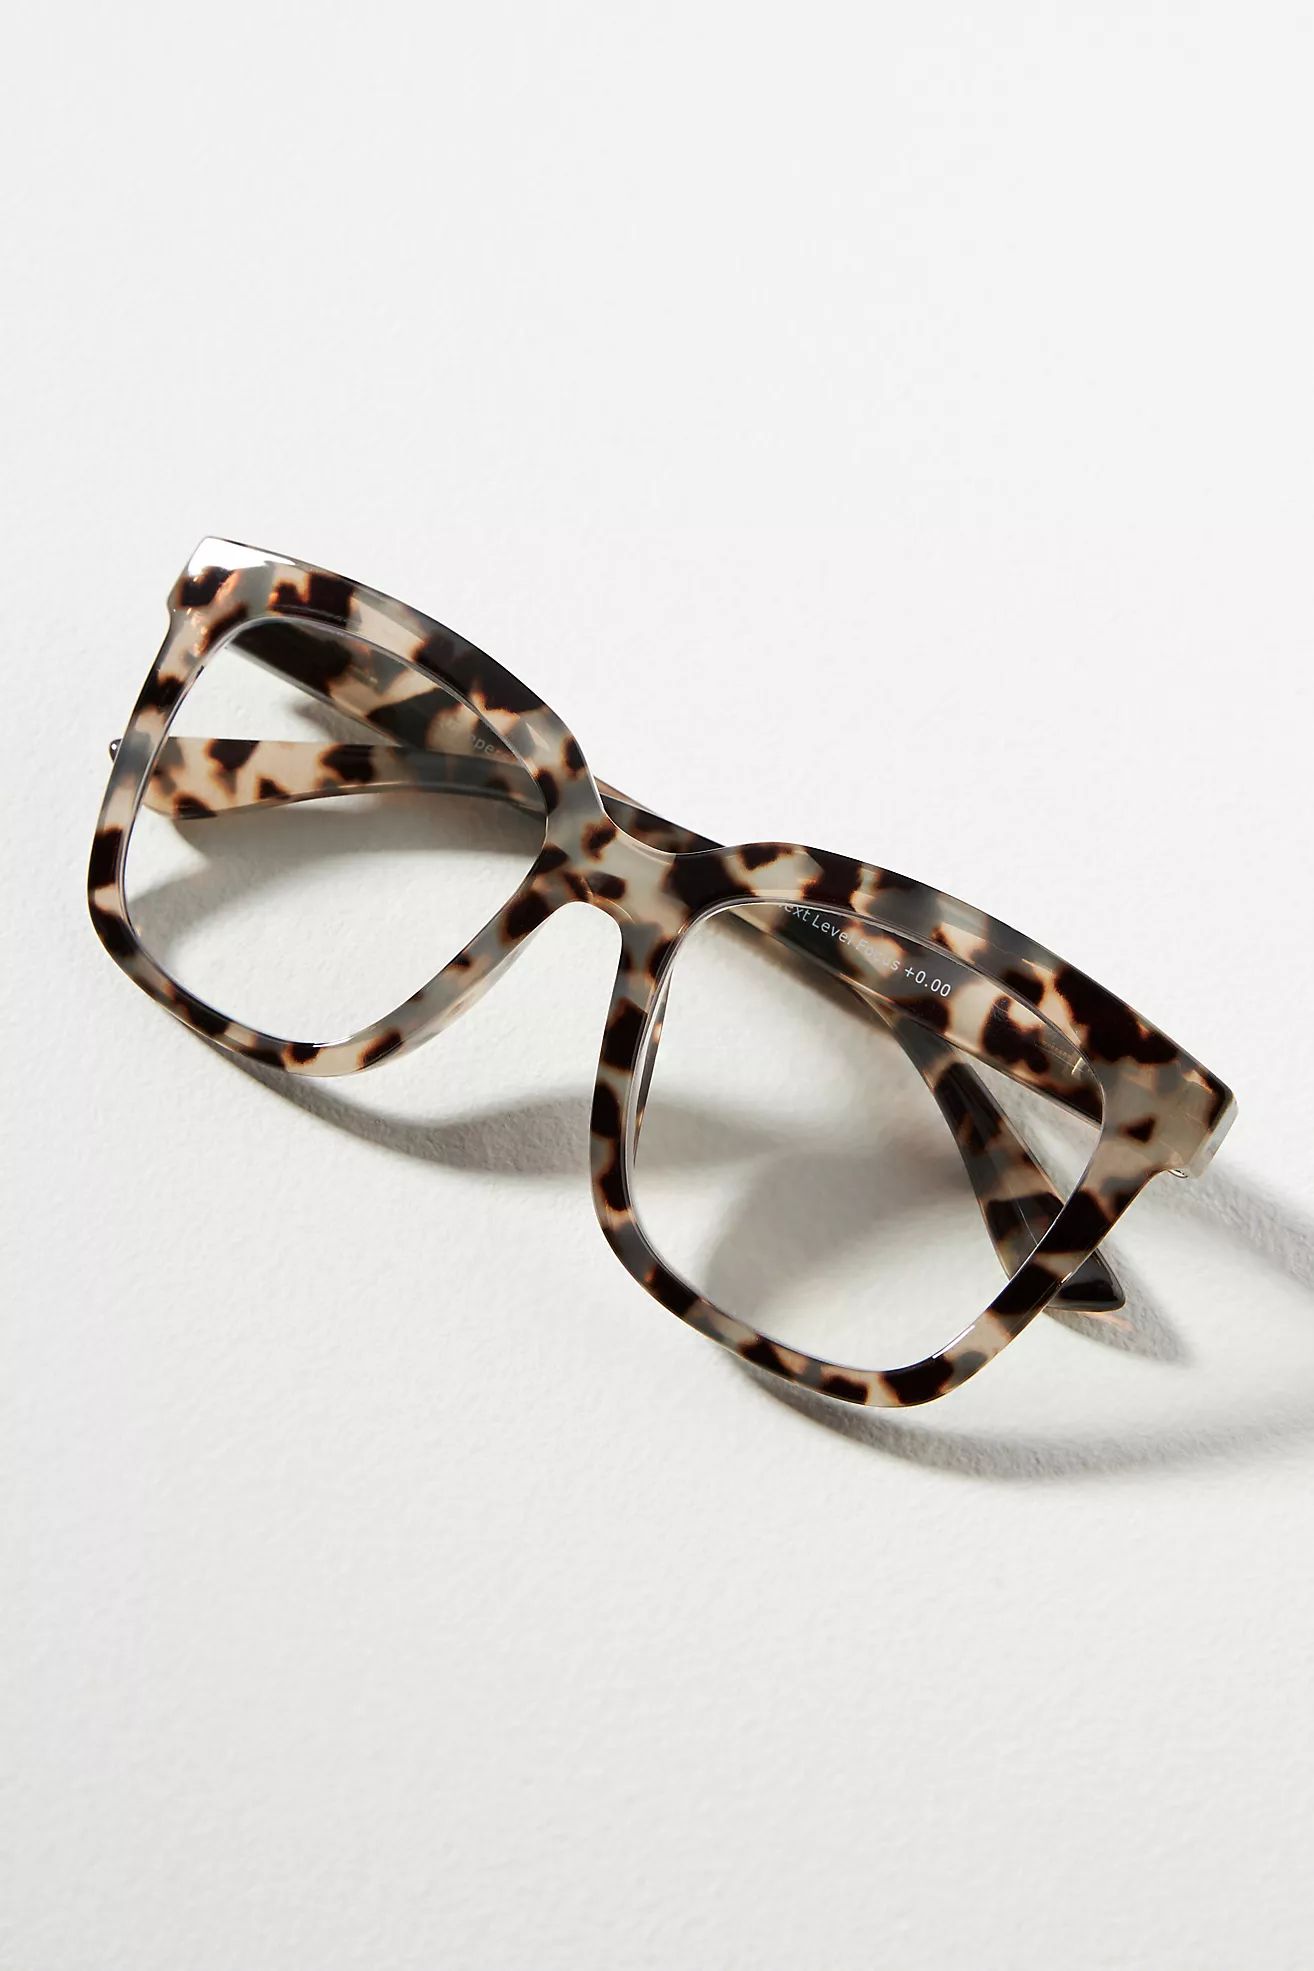 Peepers Next Level Blue Light Readers | Anthropologie (US)